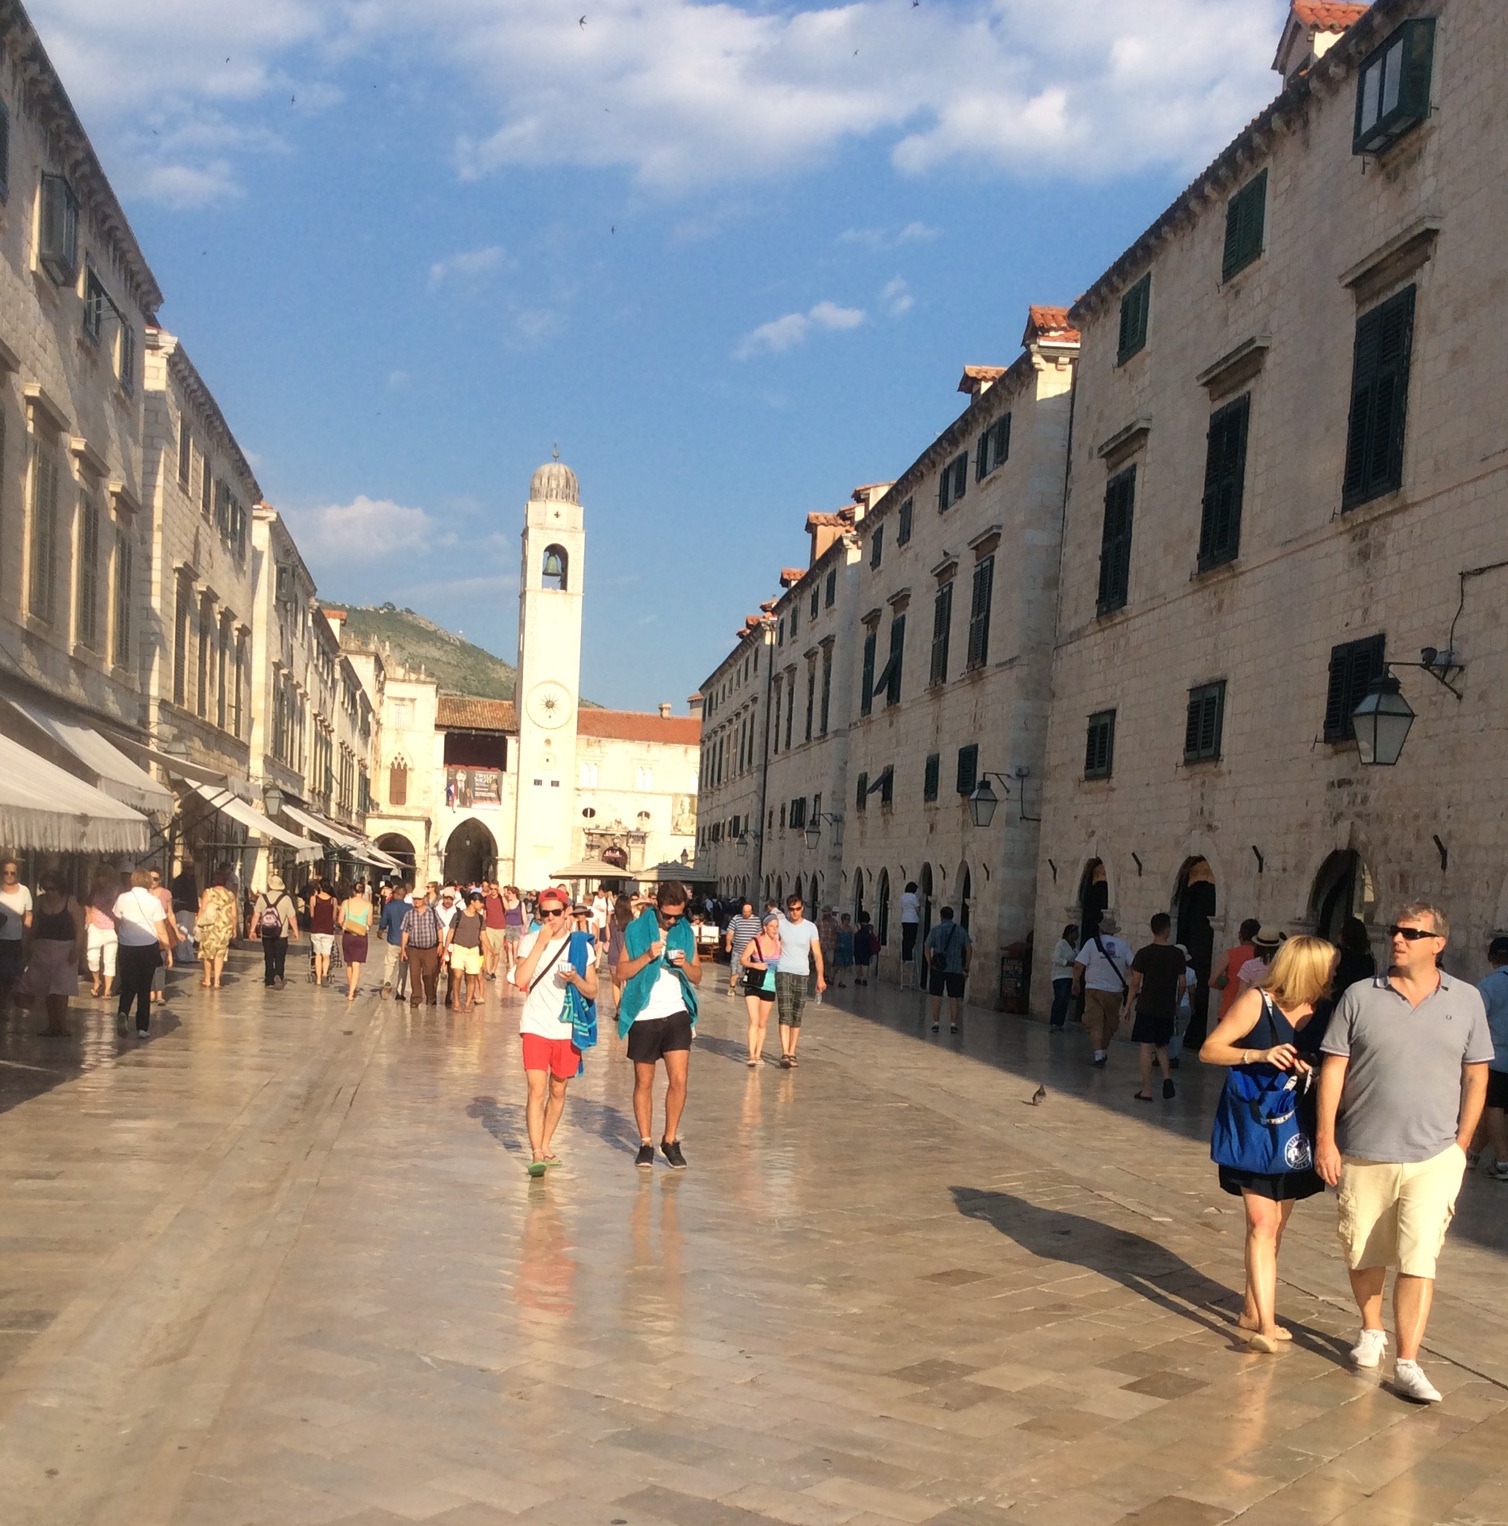 Walled city of Dubrovnik